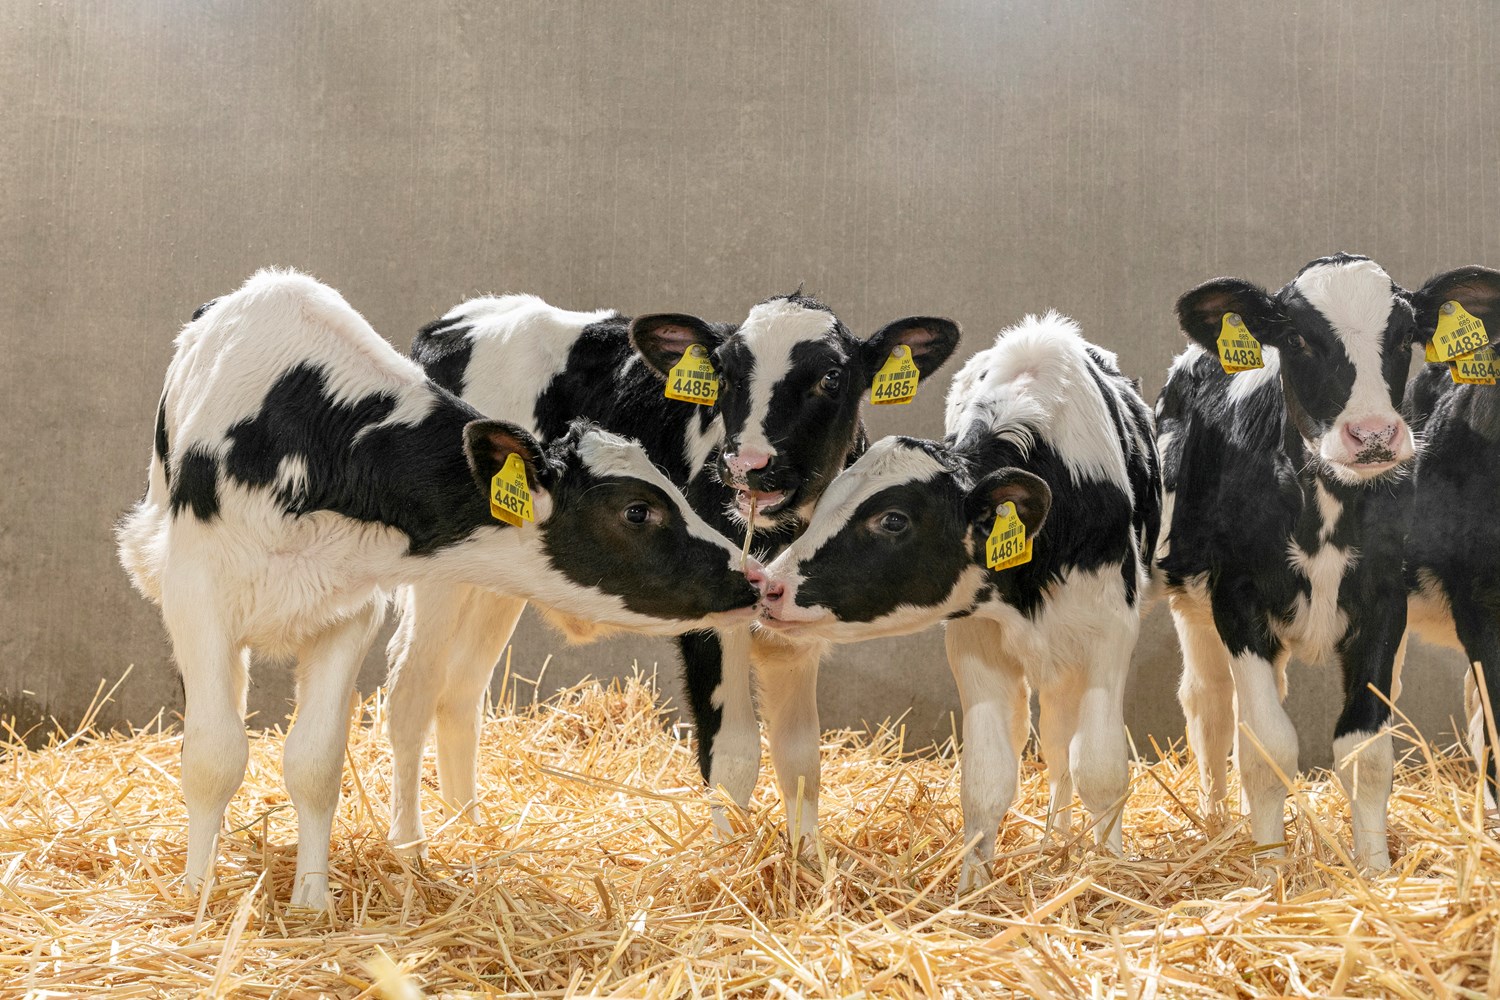 Calves must be born healthy and without problems. therefore, it is essential to provide a safe, stress-free and clean environment around calving. Each birth is unique, and requires your undivided attention for the  